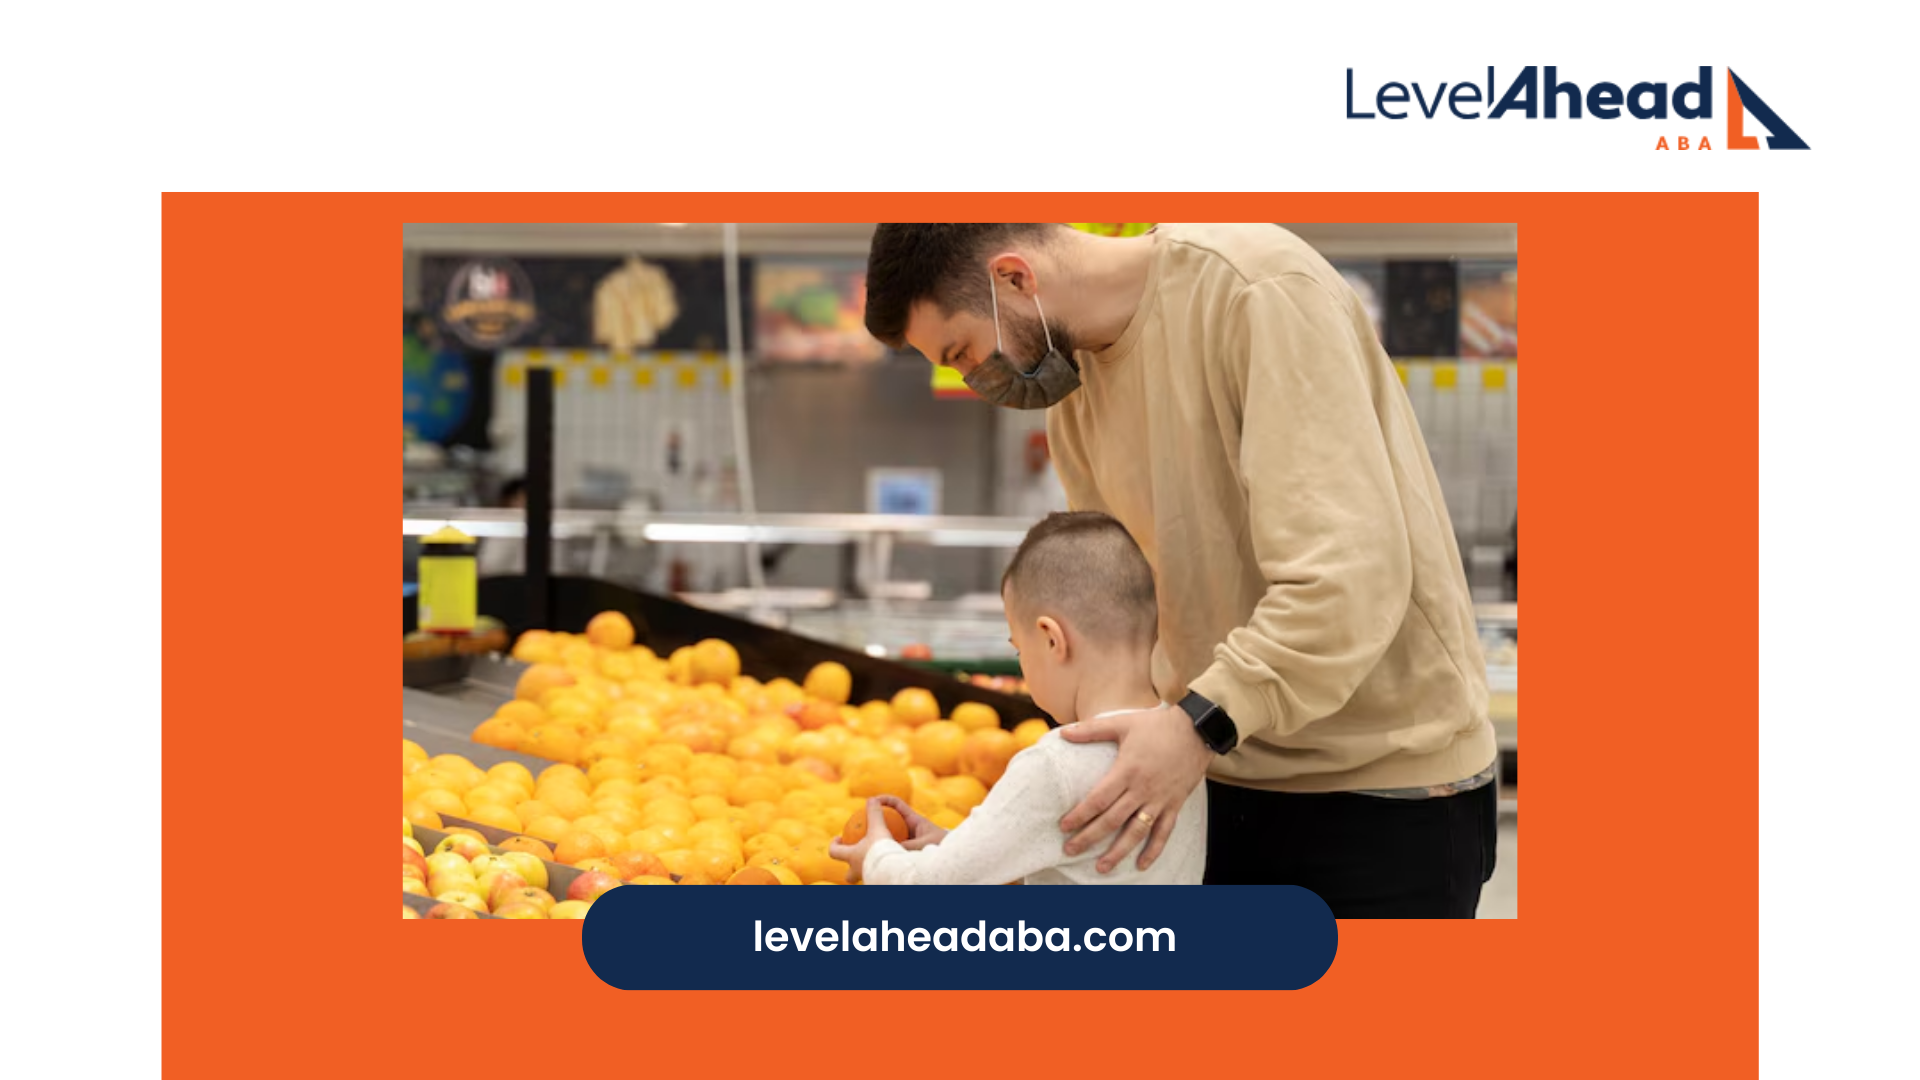 A dad and his child looking at oranges in a grocery store.